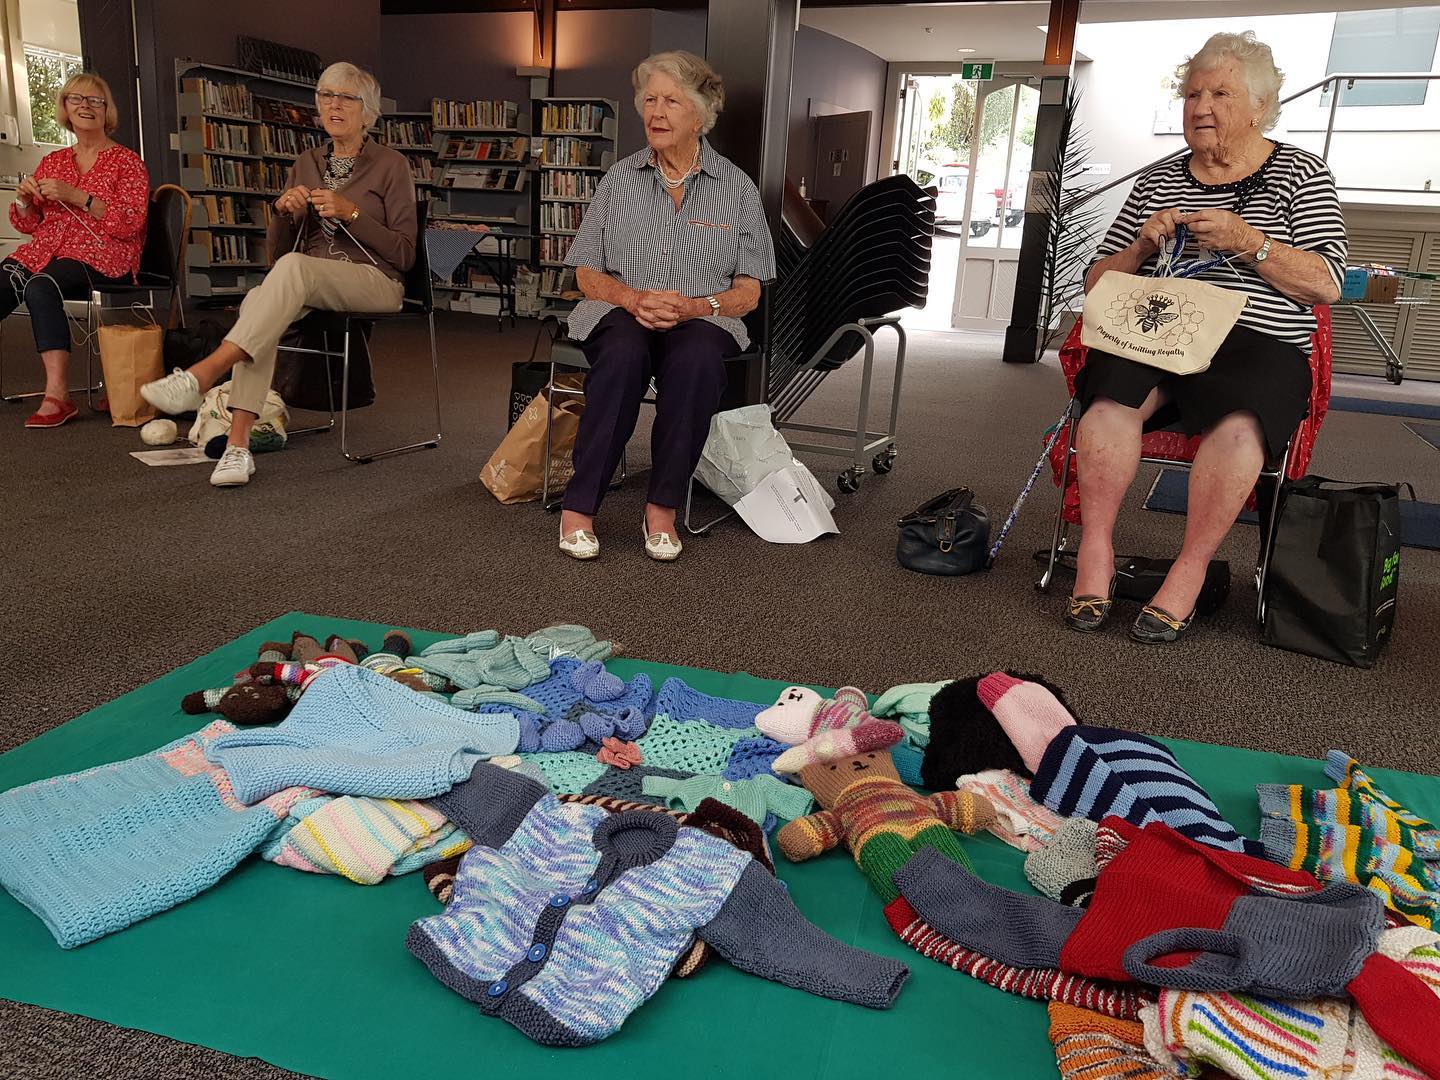 Our Pins & Needles group meet on Monday. What a fantastic job they do working together to make items for others 🧶🧡

#PinsAndNeedles #Knitting #Thankful #Community #StAidans #Remuera